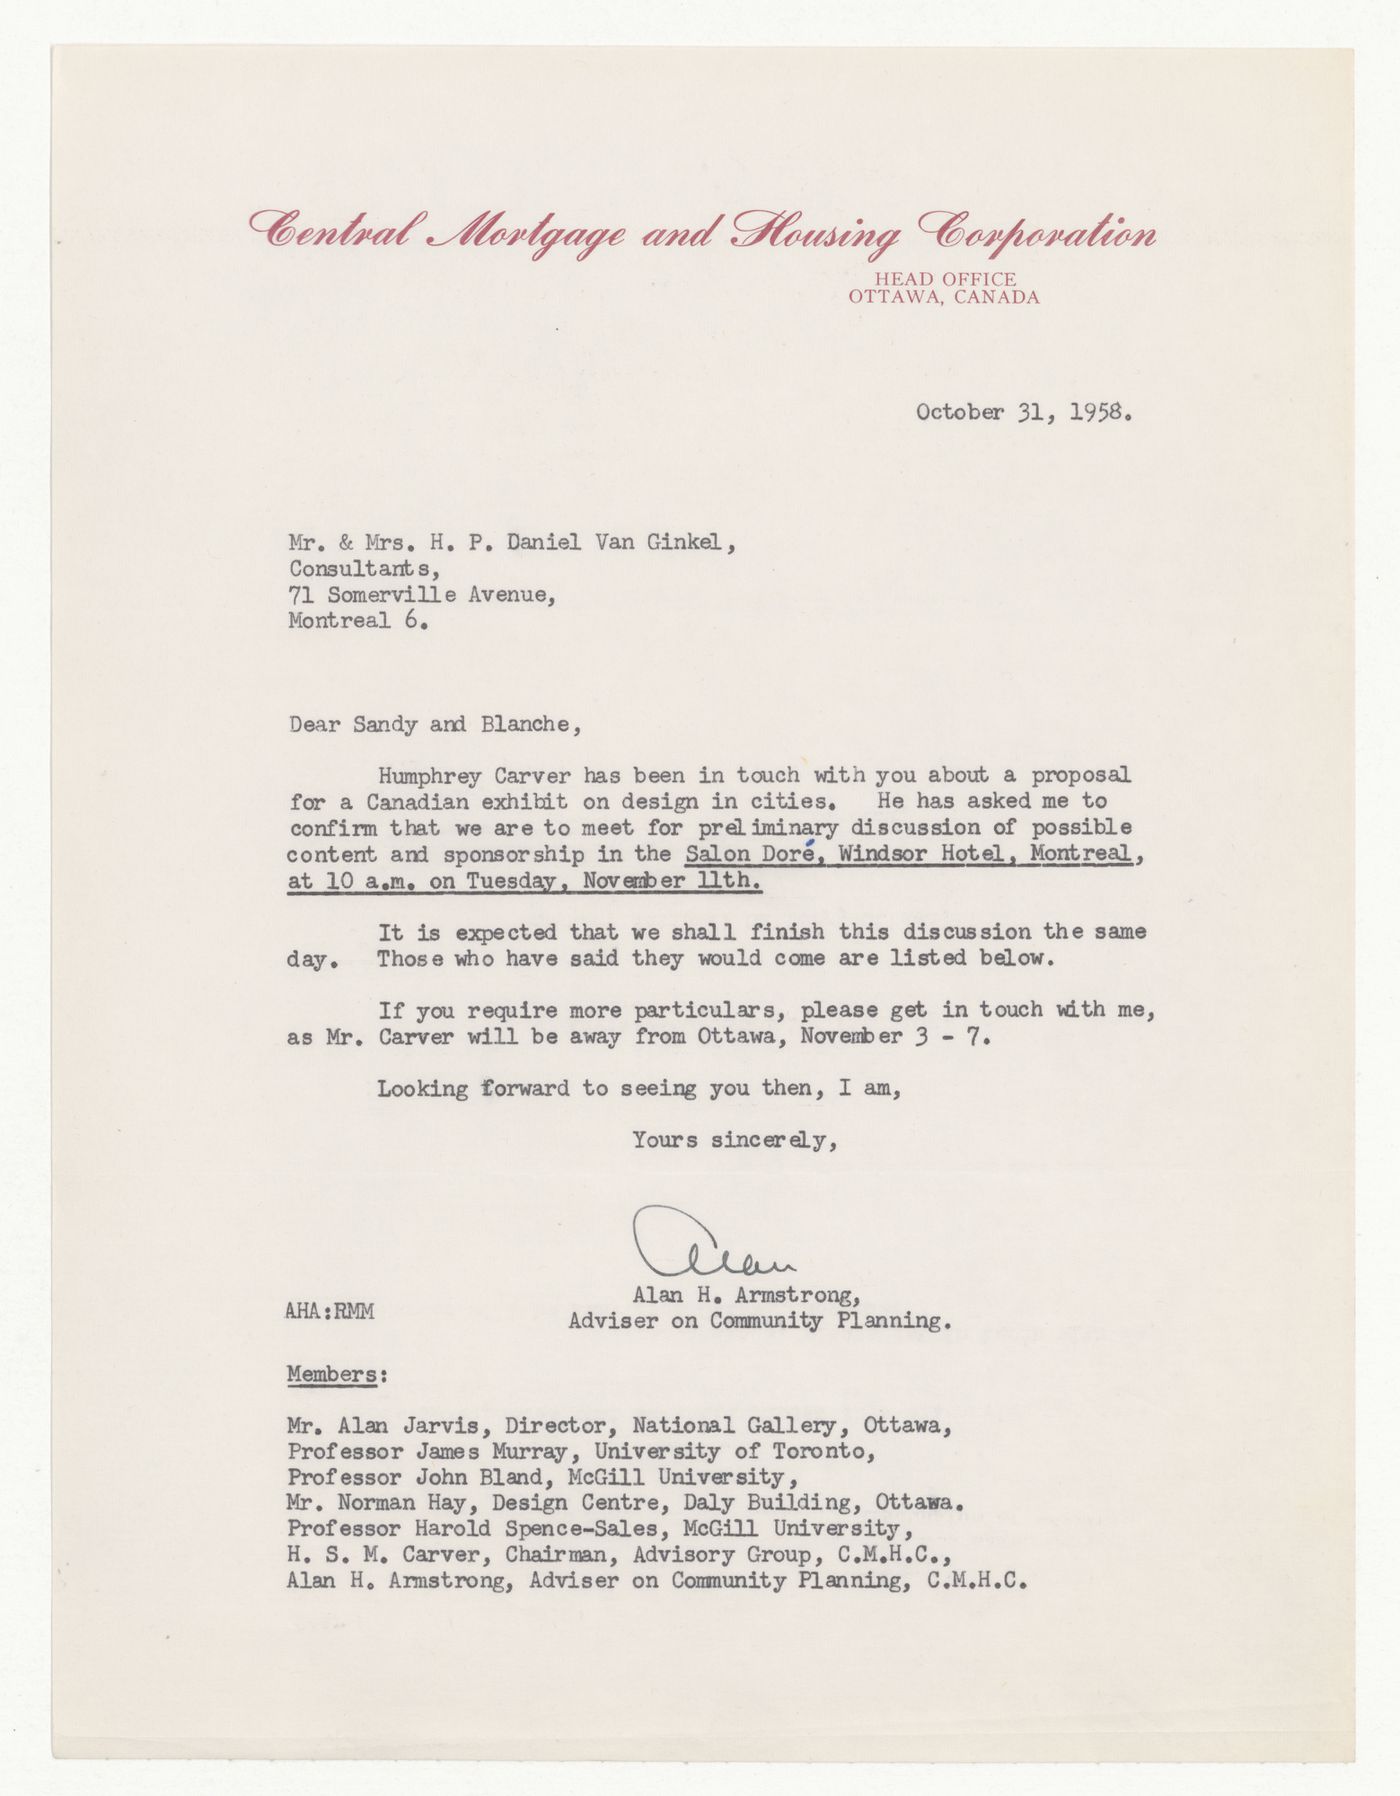 Letter from Alan H. Armstrong to H. P. Daniel van Ginkel and Blanche Lemco van Ginkel for CMHC Exhibition